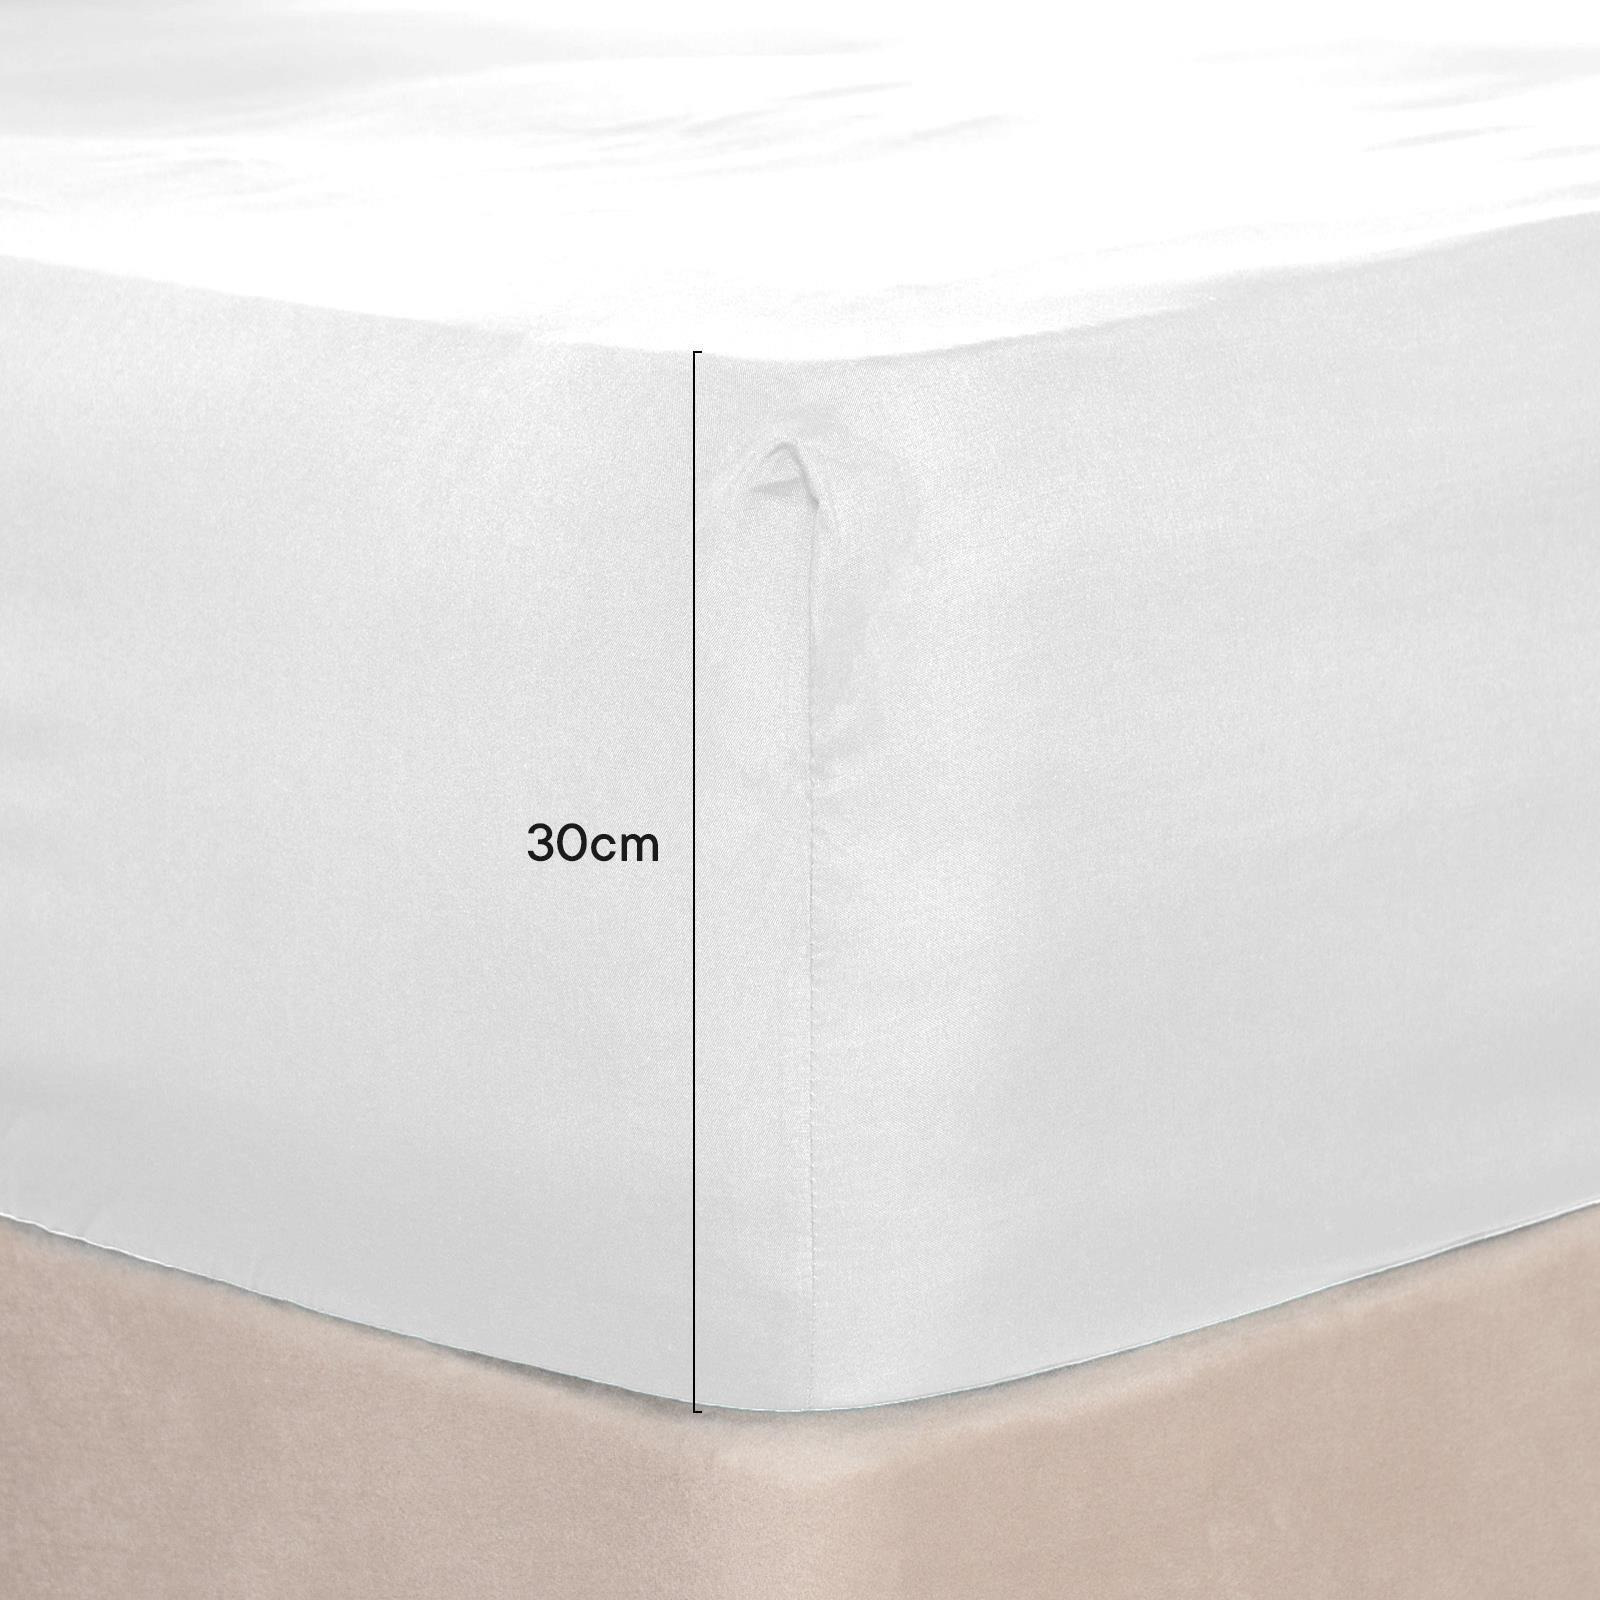 Plain Bed Sheet Microfibre Deep Fitted Soft - image 1